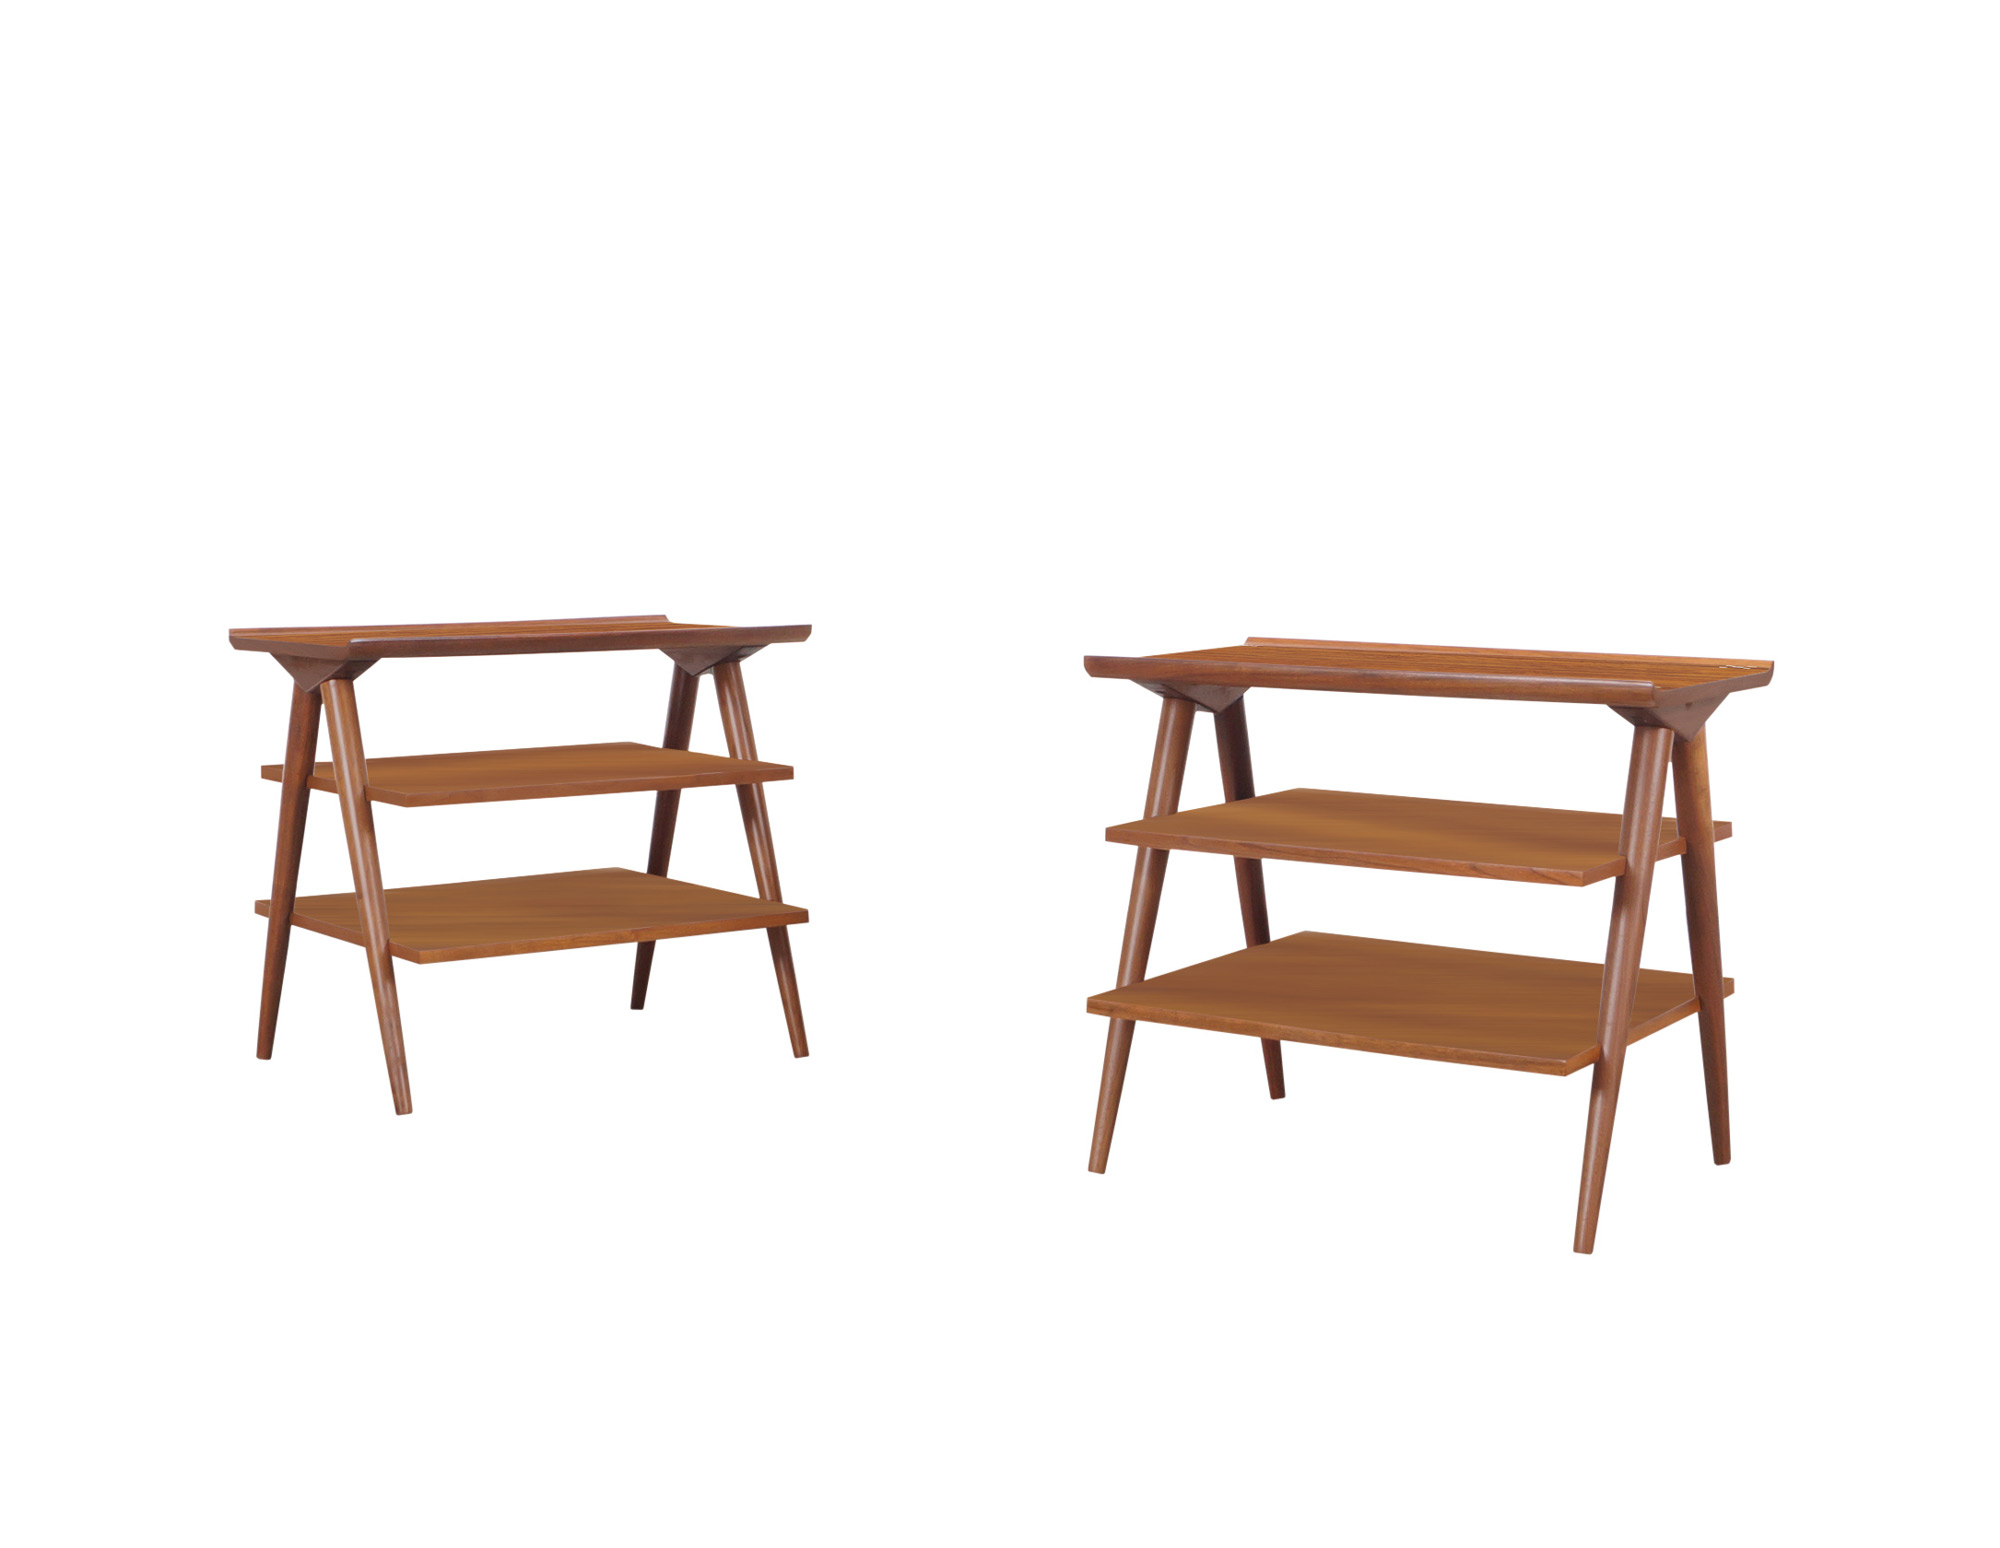 Vintage Three-Tiered Walnut Tables by Merton L. Gershun for American of Martinsville